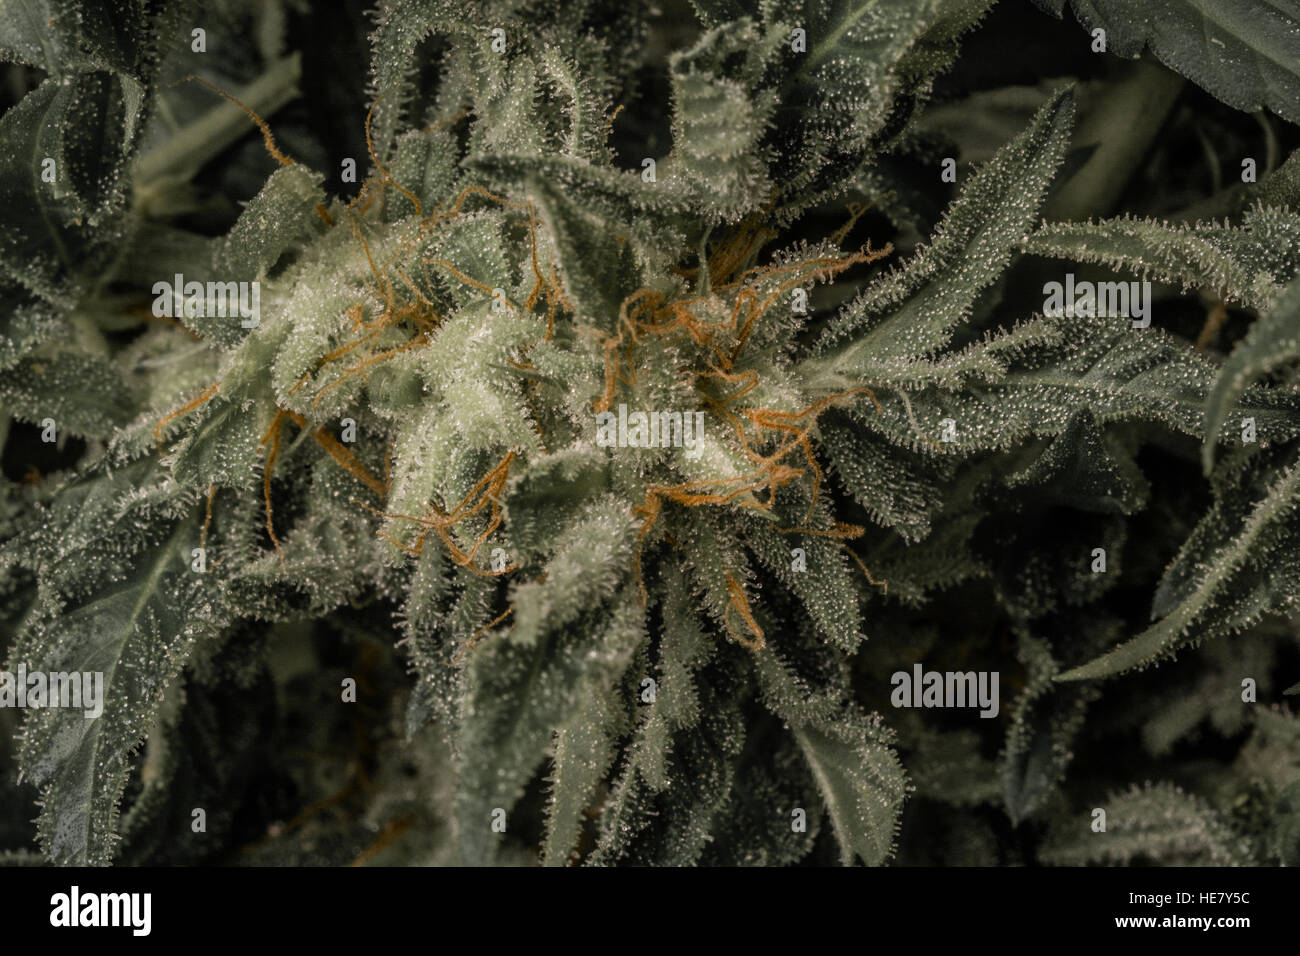 Le Cannabis, skunk, weed, issus de chez, dope, herbe, weed-super Banque D'Images